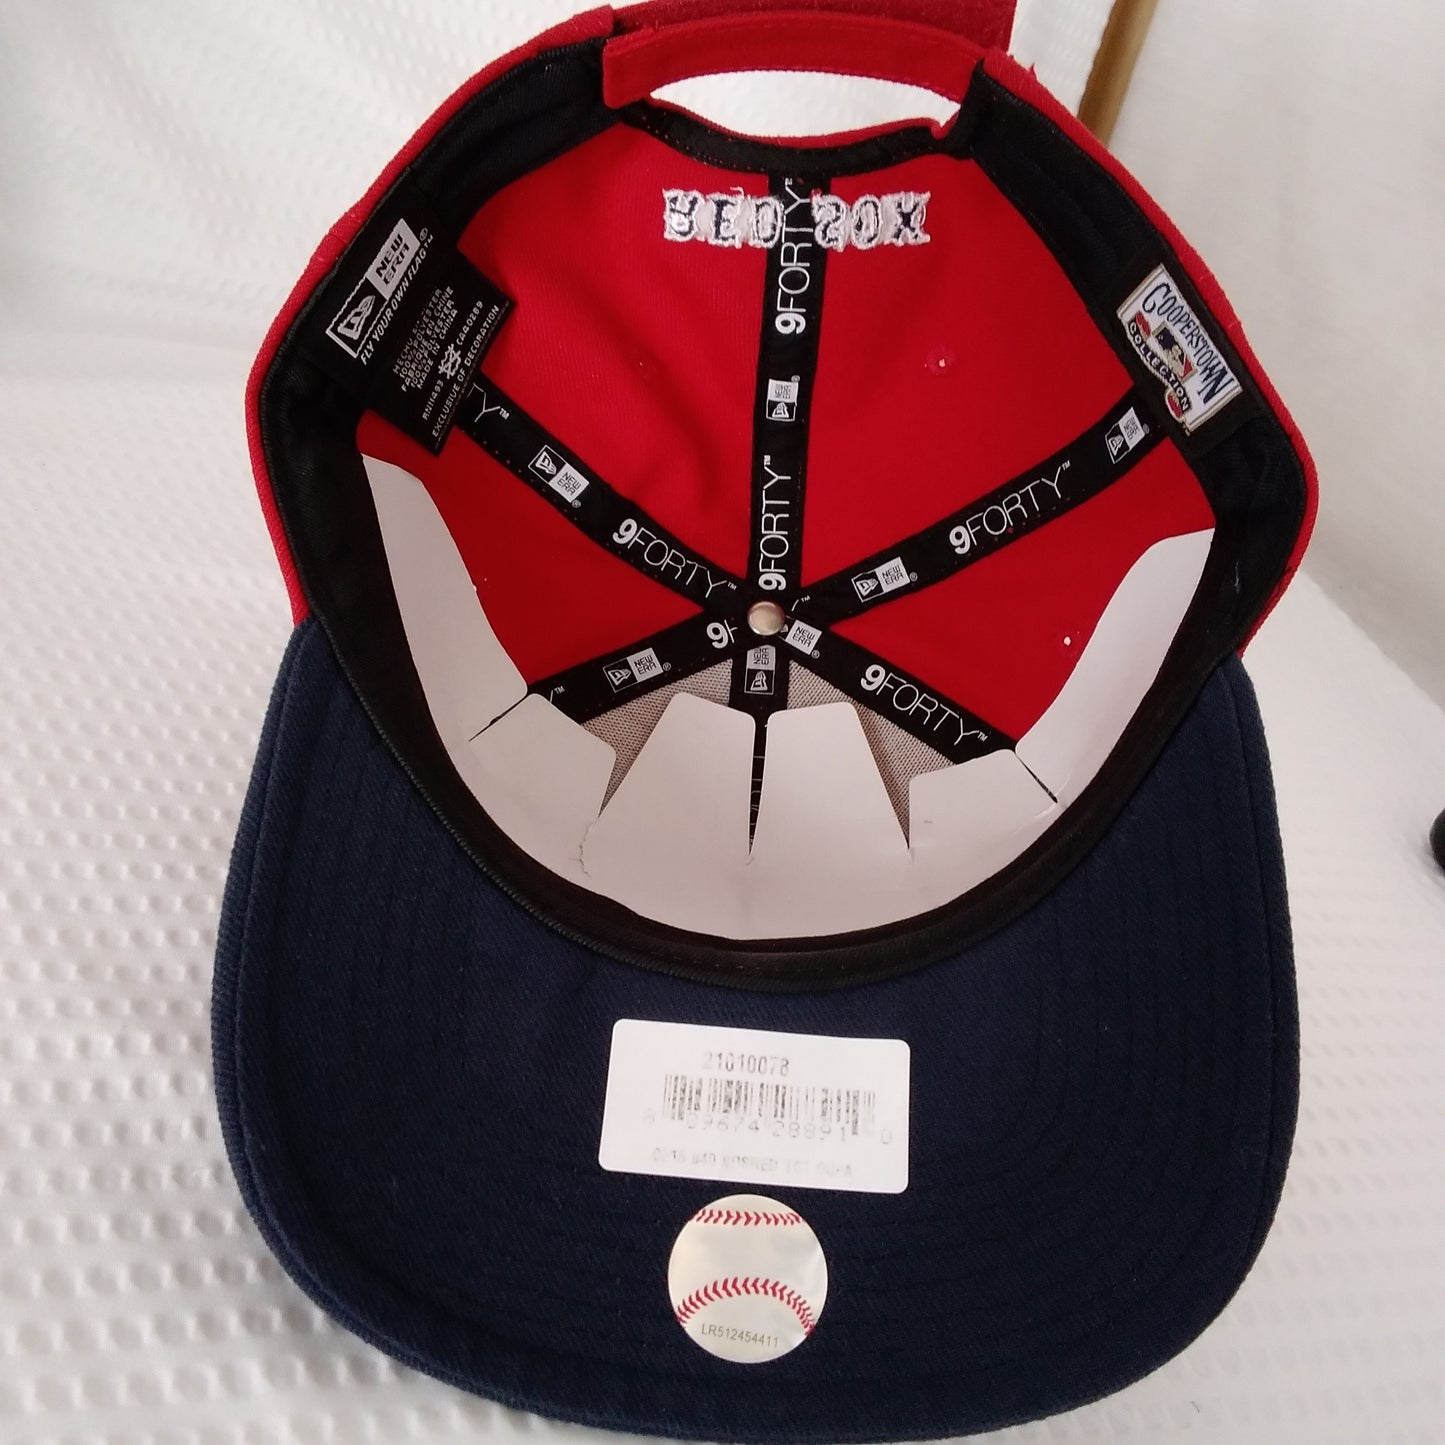 New Era - Boston Red Sox Cooperstown Collection Red Cap with B Logo NWT